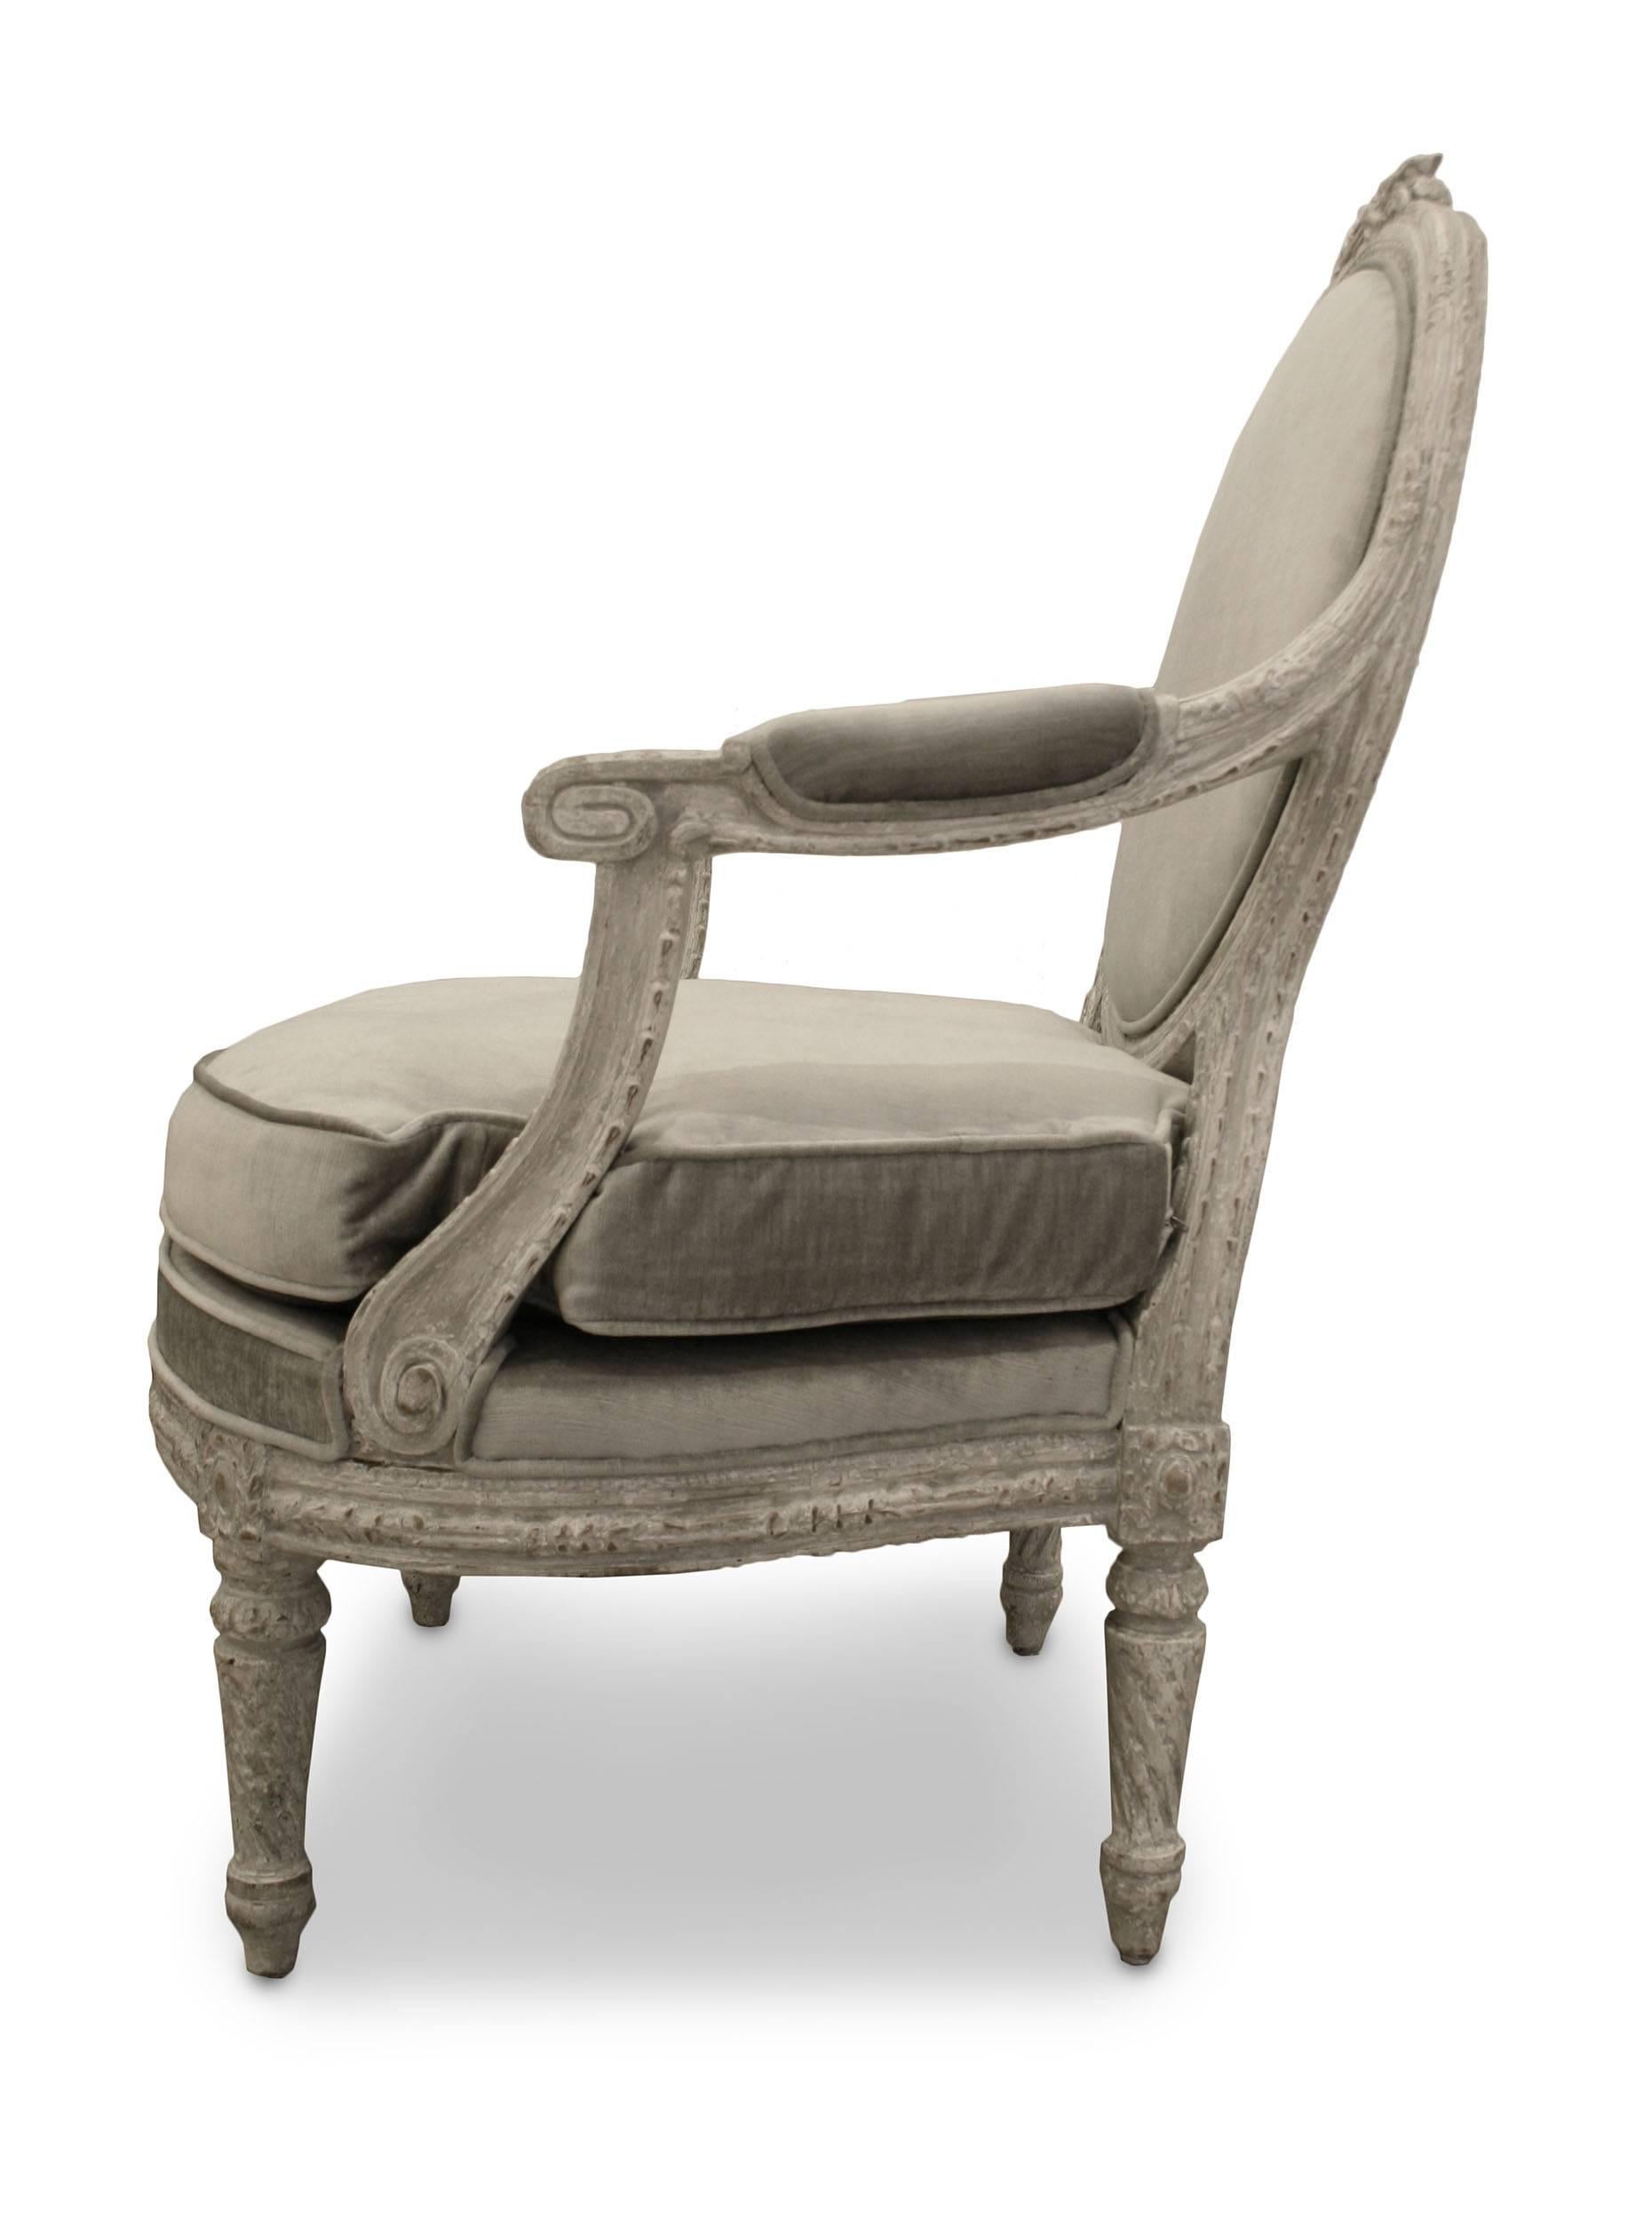 Pair of Italian Piedmontese (circa 1785) open-armchairs with a rounded back having a carved floral crest, the frame carved with wheat, and the legs having a twisted fluting.